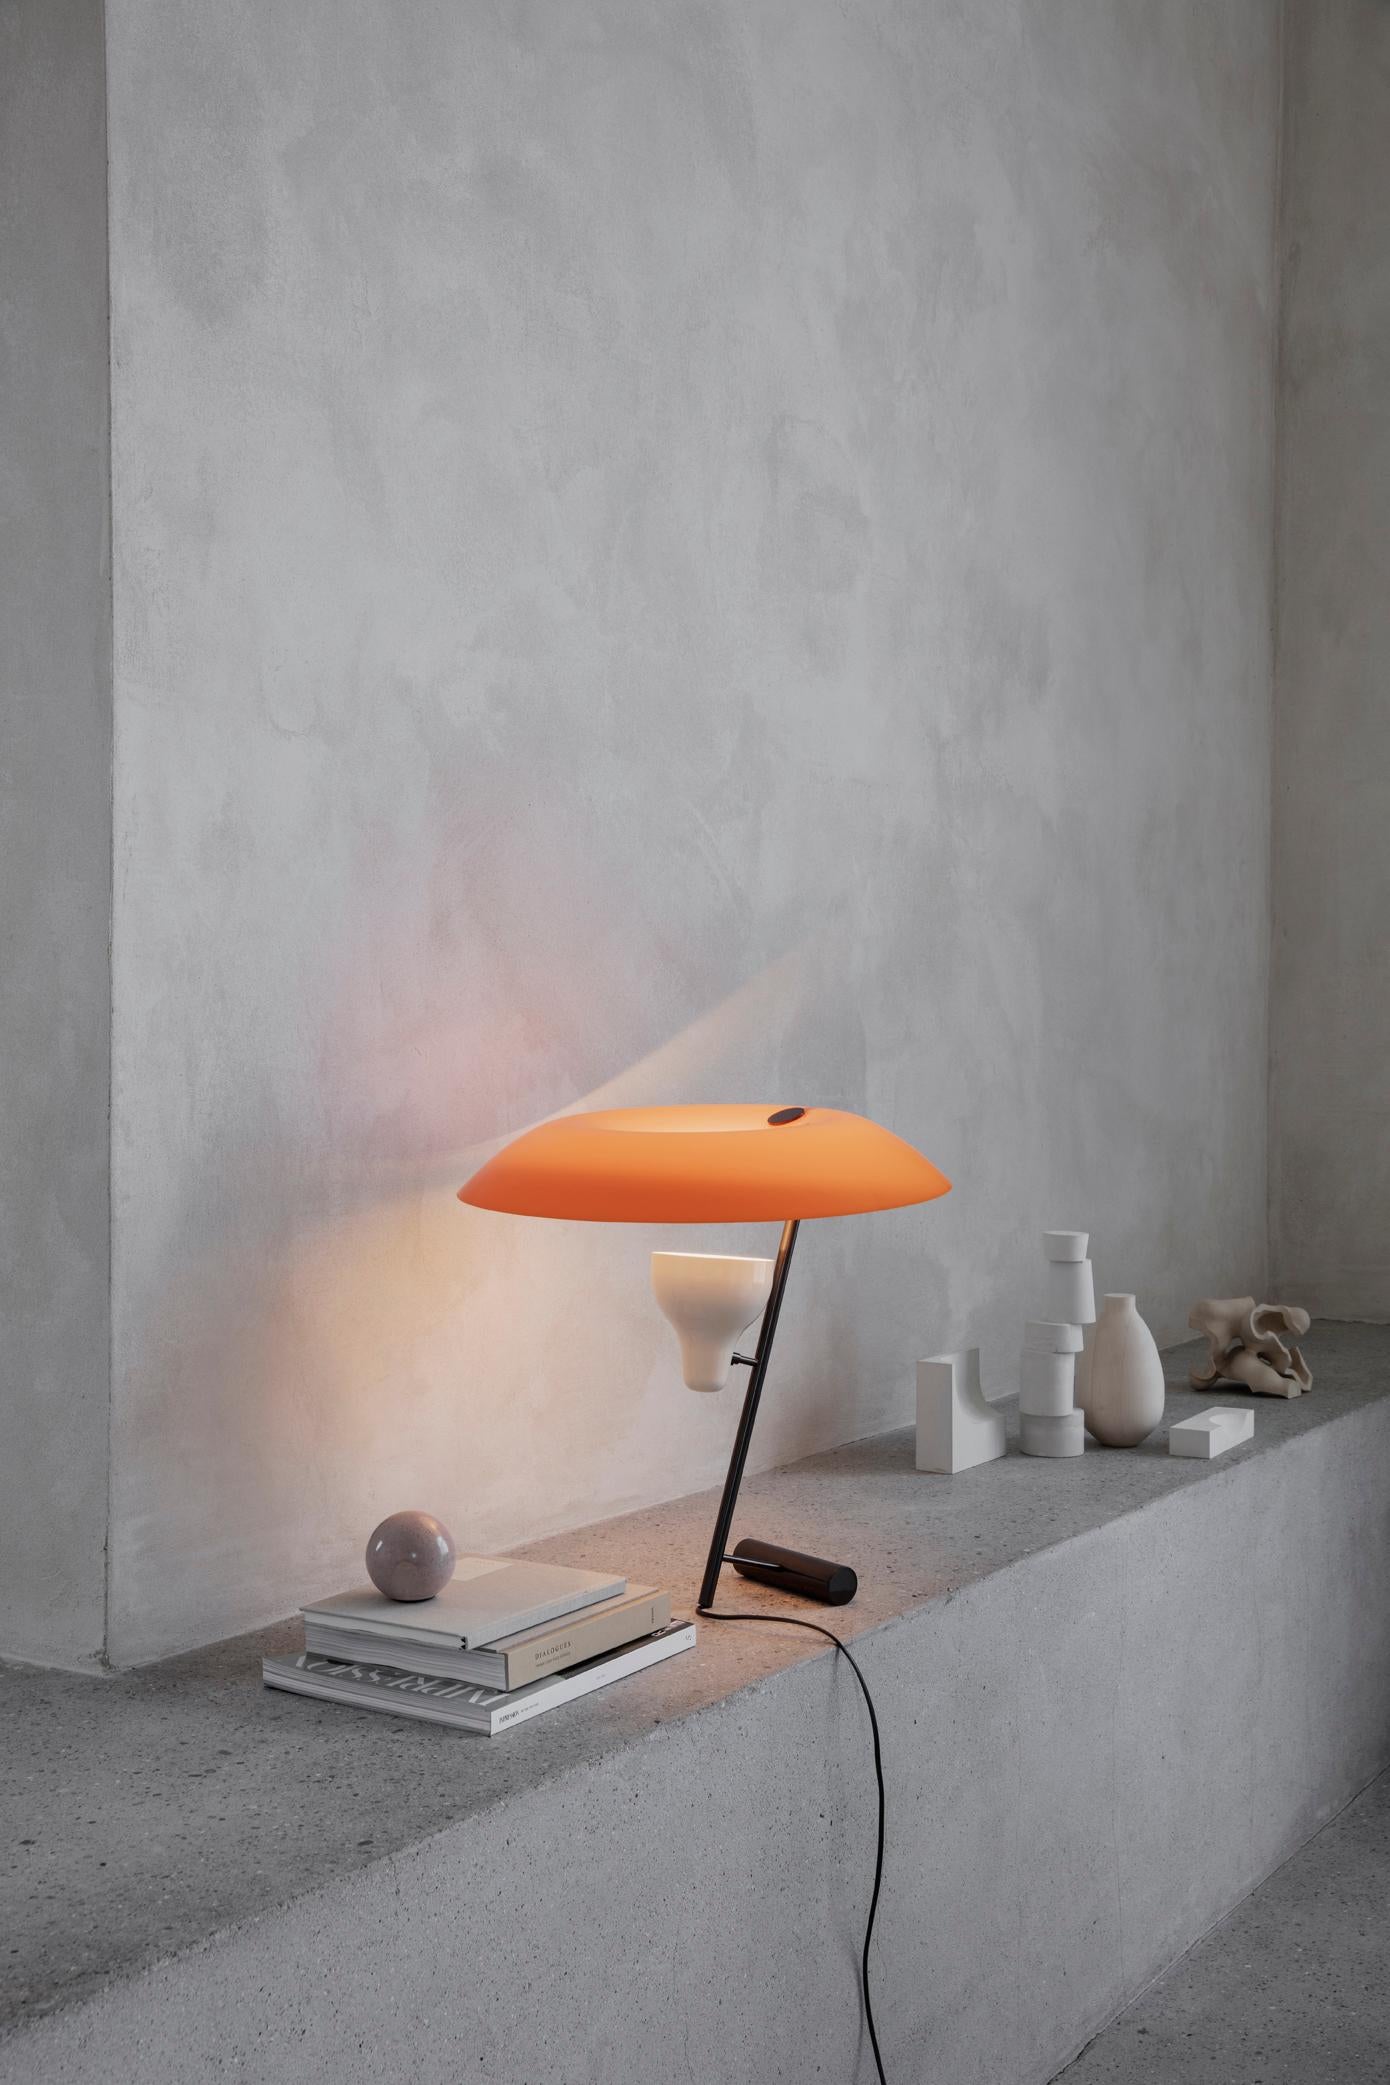 Model 548
Design by Gino Sarfatti
The table lamp designed in 1951 is a study in balance and light reflection through a screen, a recurring theme in Gino Sarfatti’s work. Model 548 provides both reflected and diffused light due to the adjustable